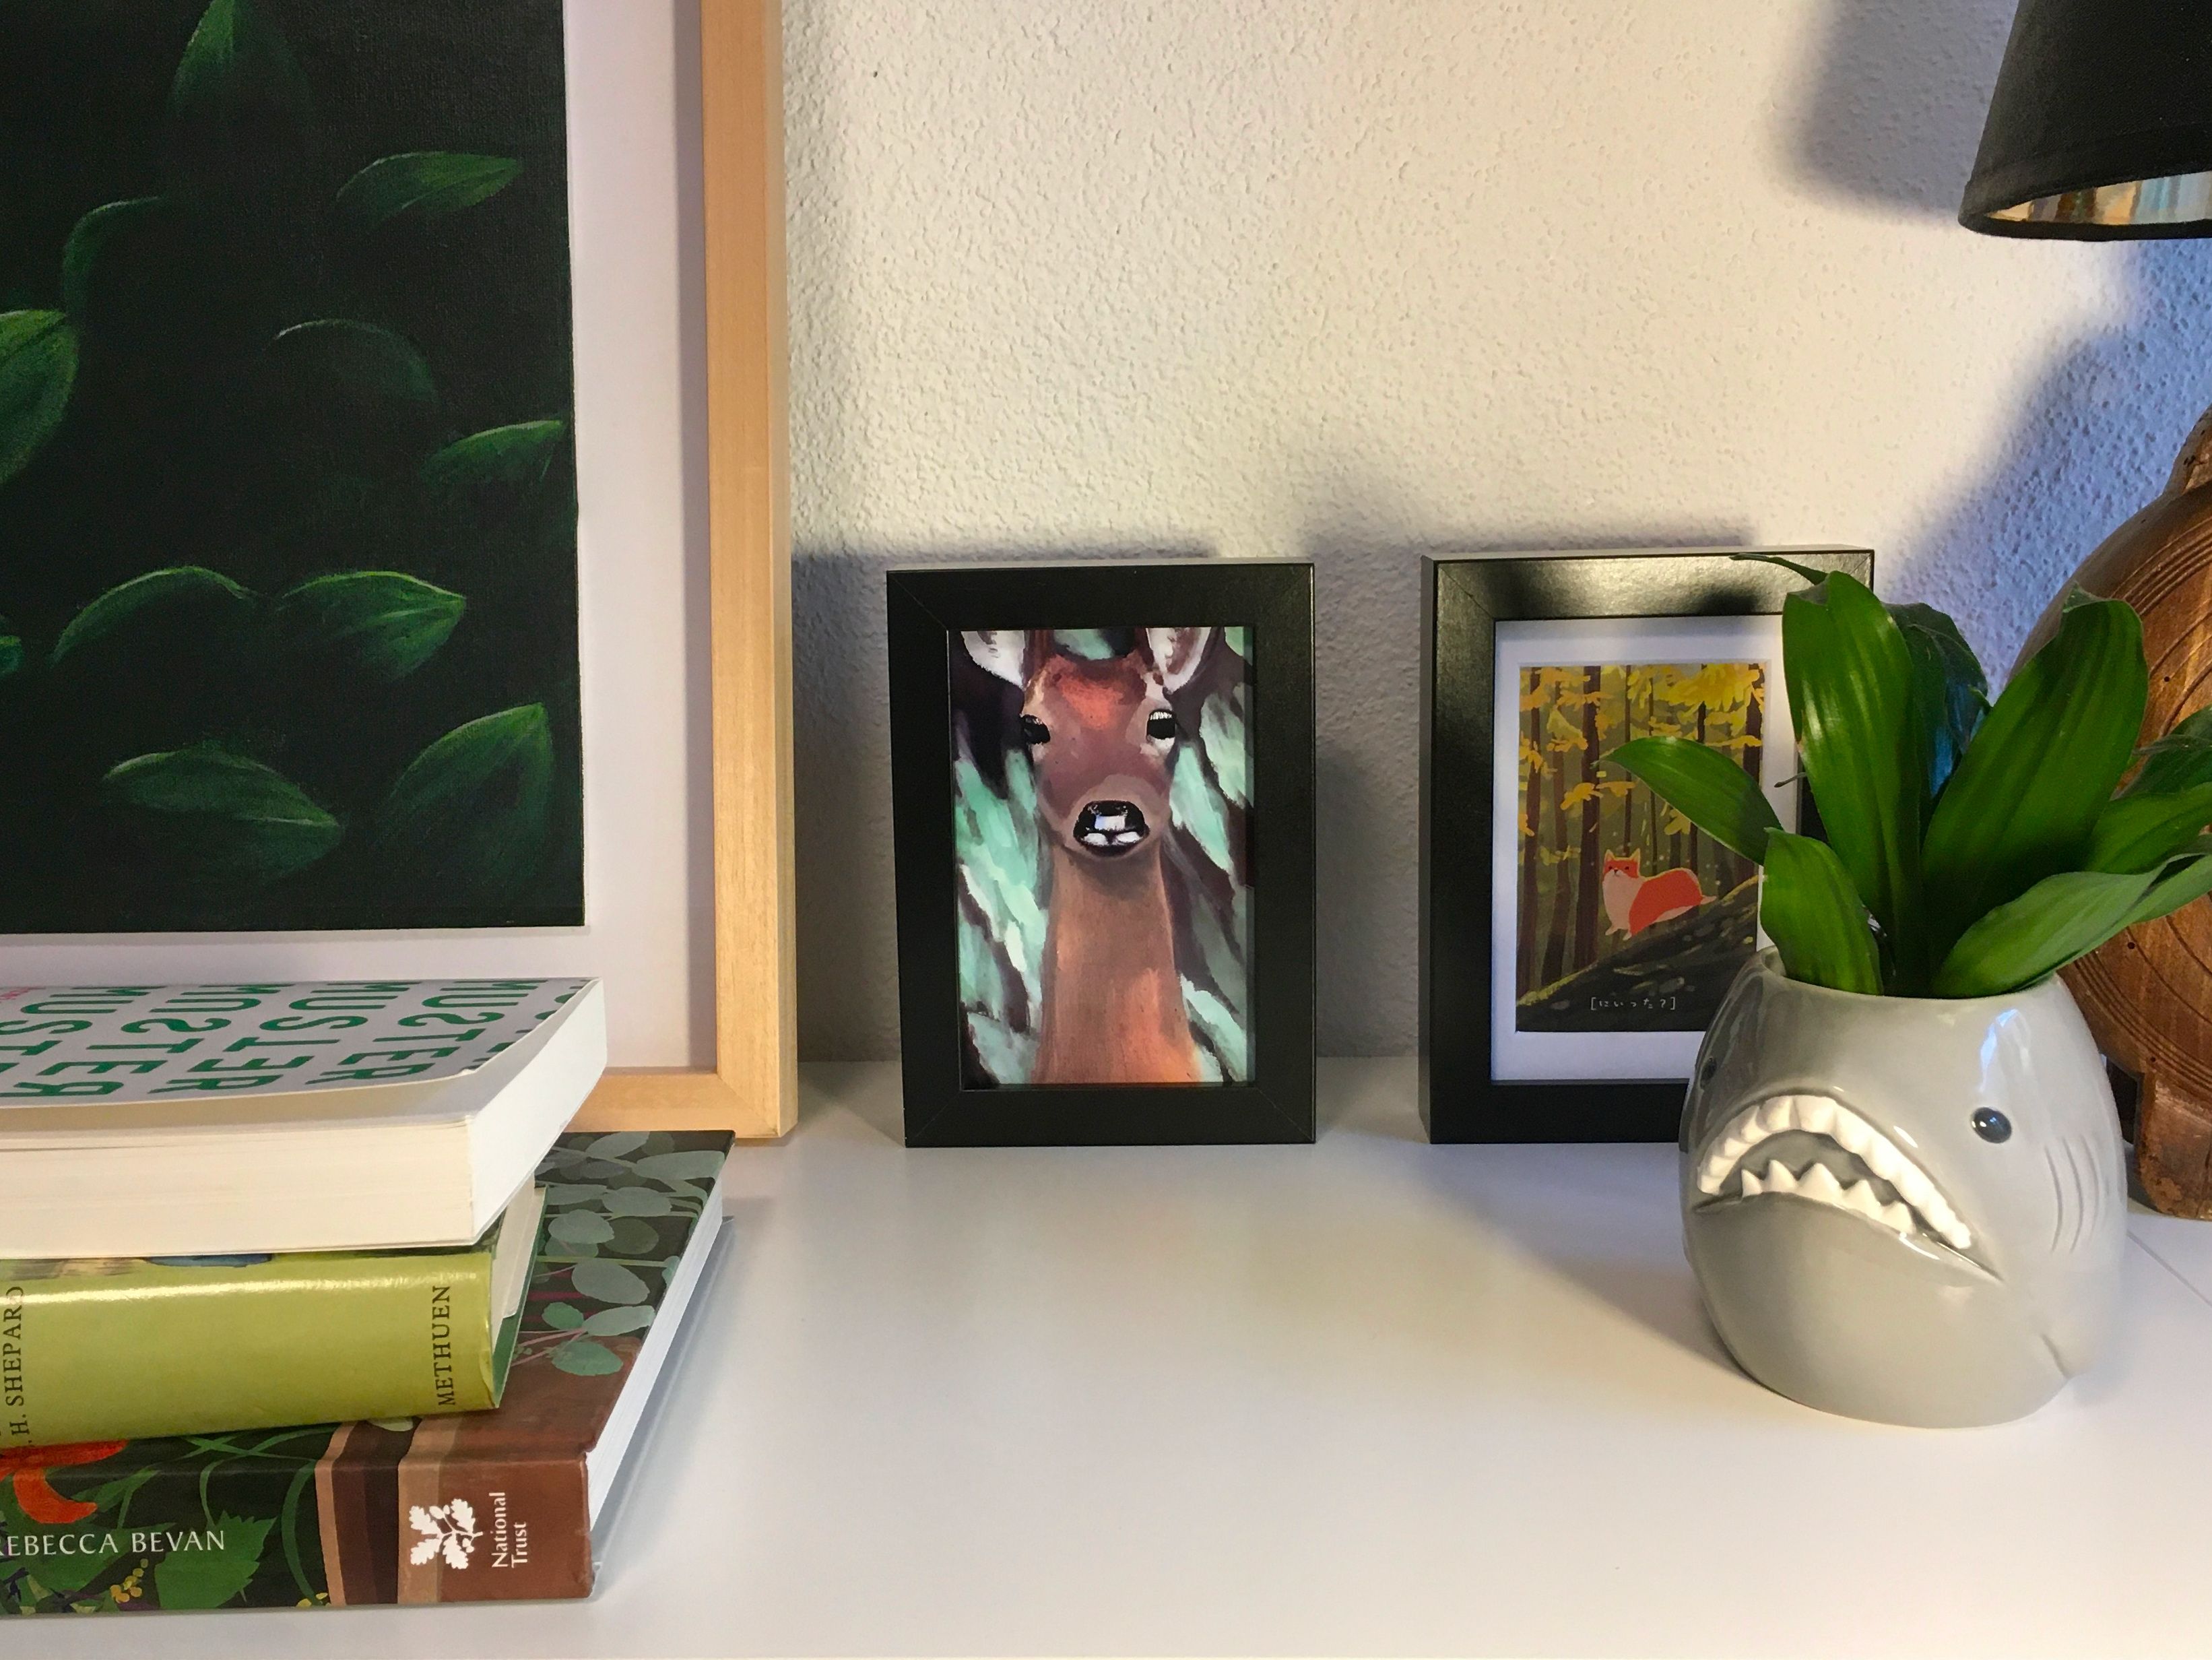 A real-life picture frame containing a drawing generated with Stable Diffusion